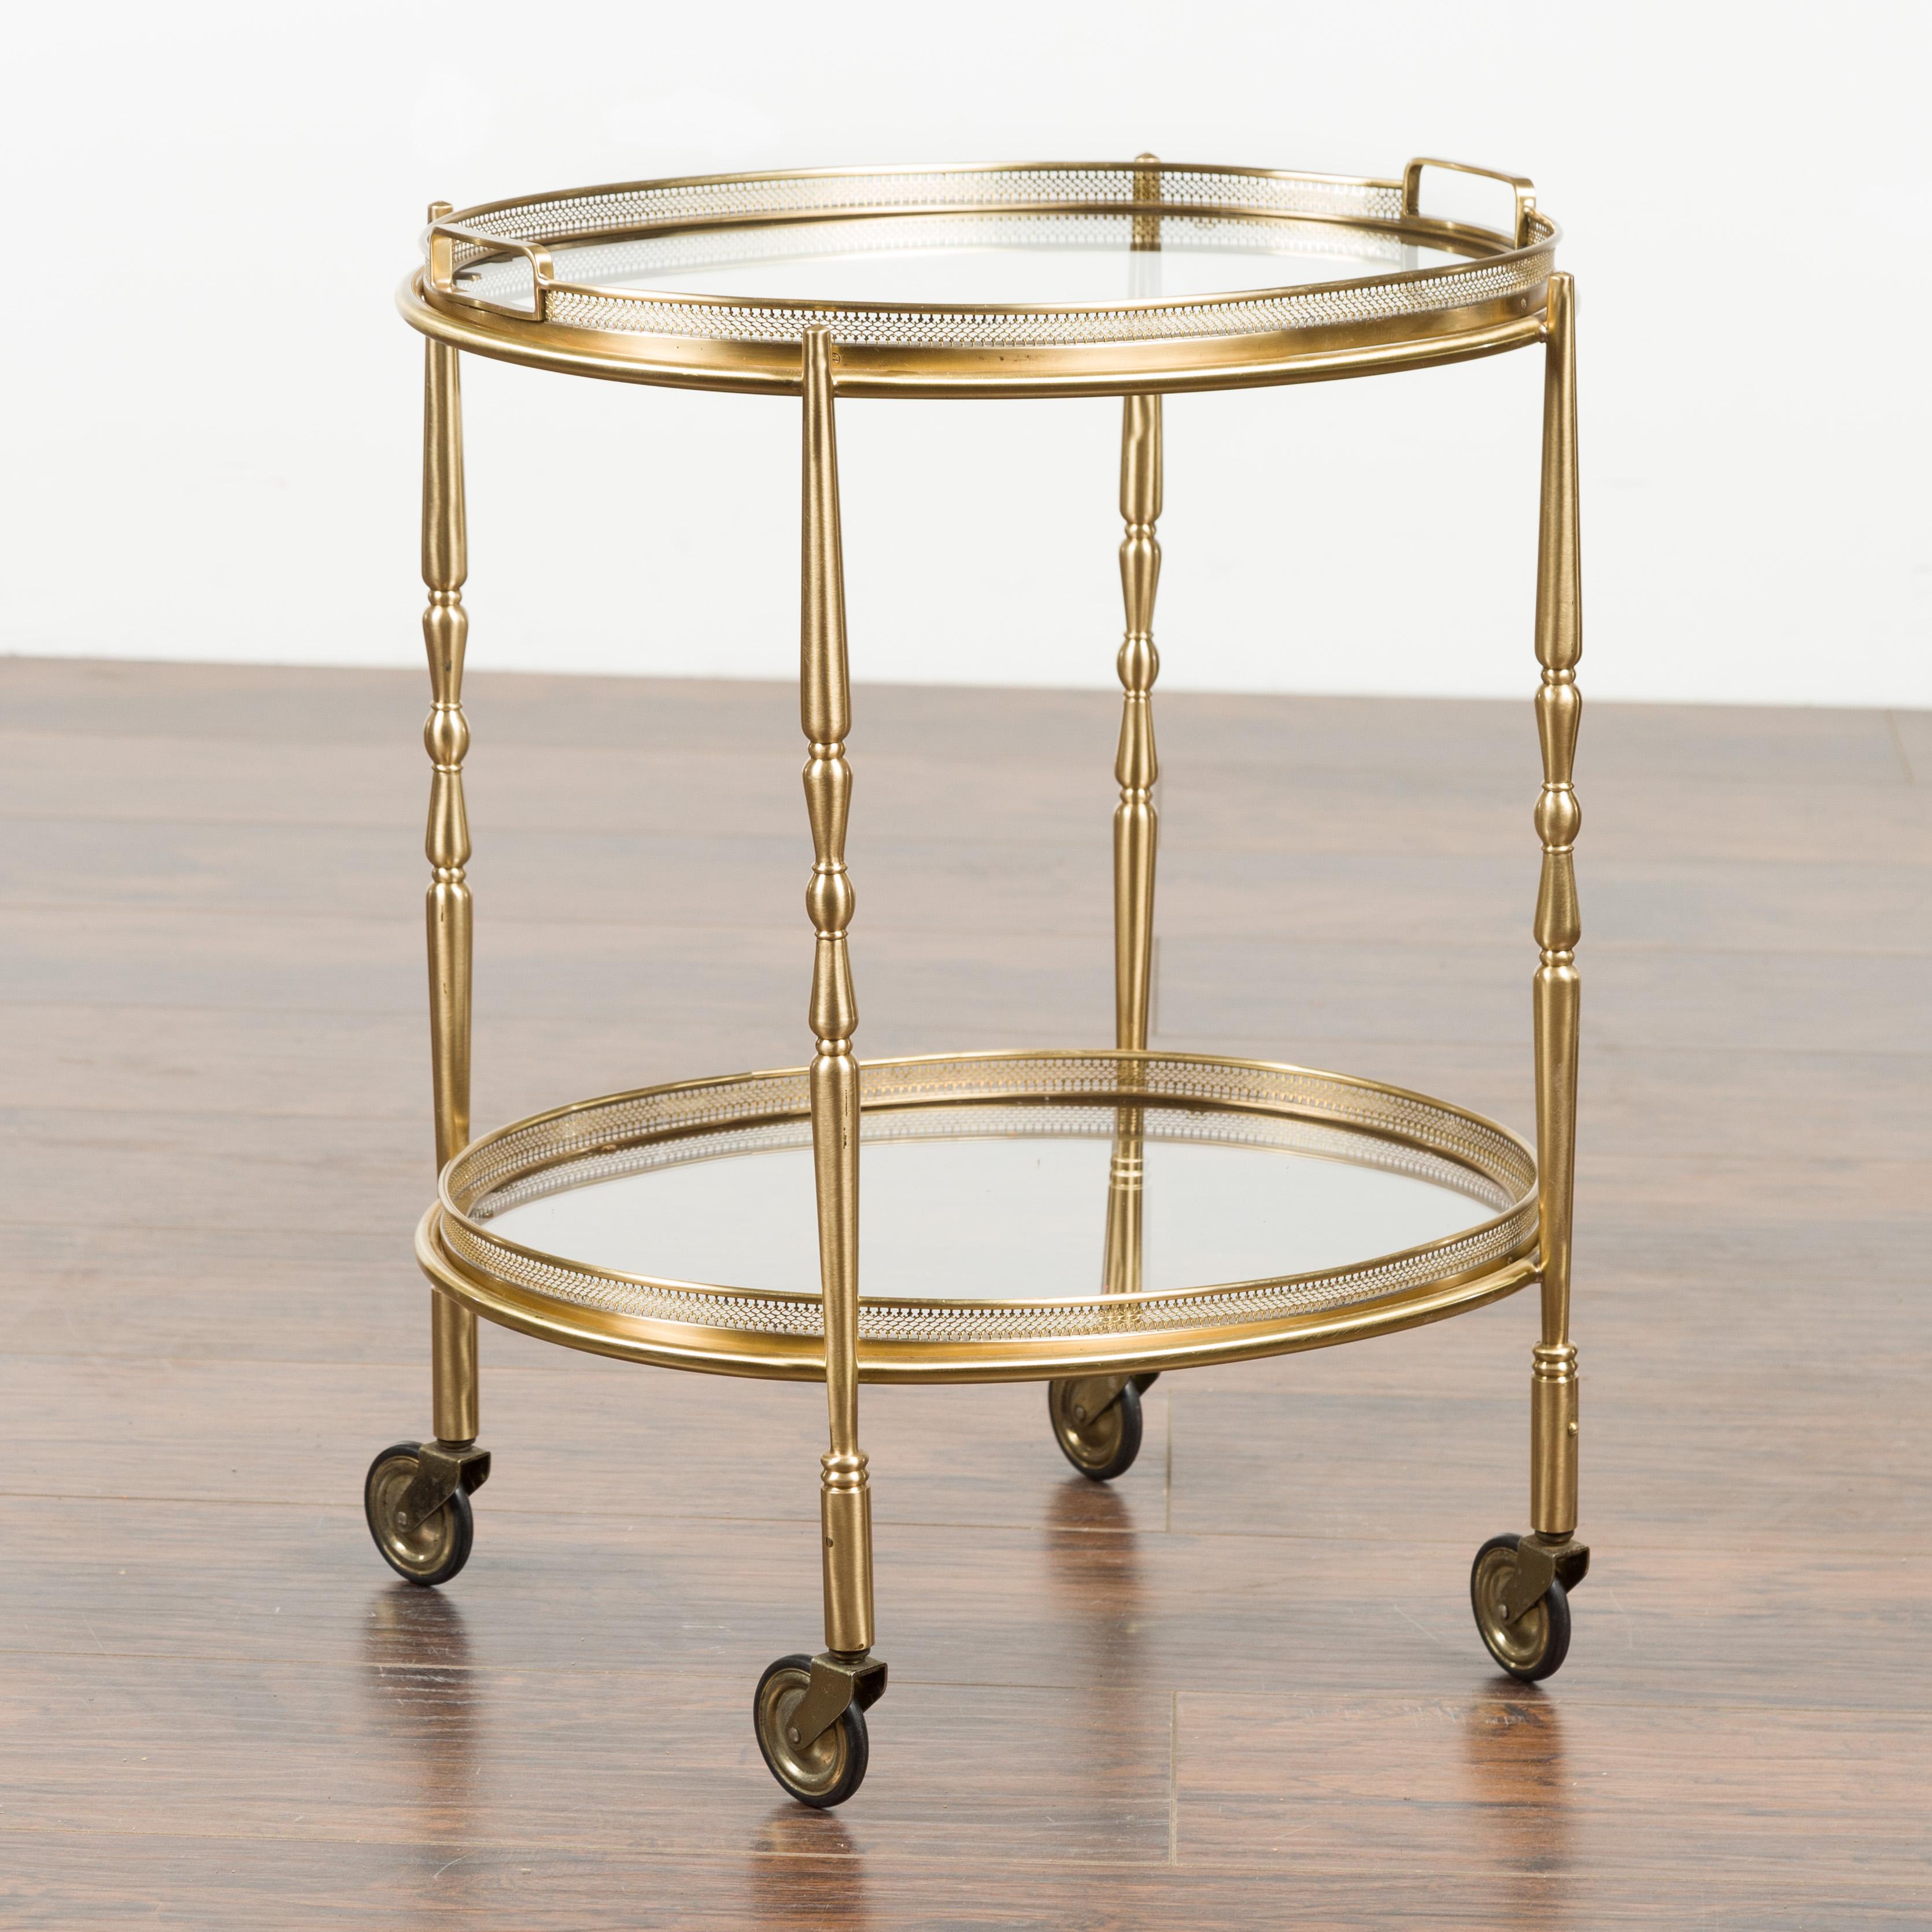 Mid-Century Modern Italian Oval Brass Cart with Pierced Gallery, Glass Shelves and Casters